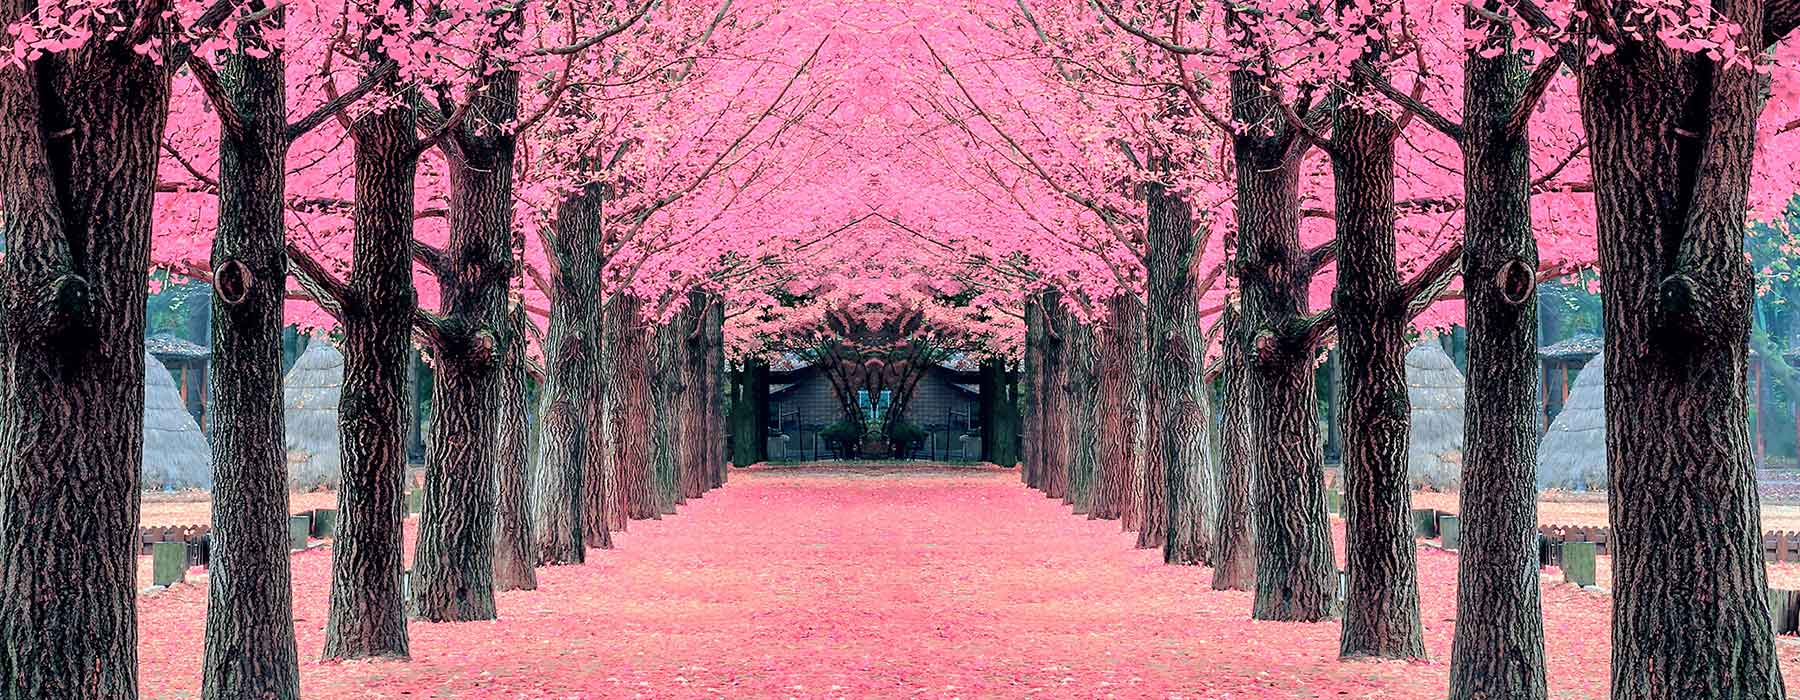 trees blooming with pink flowers